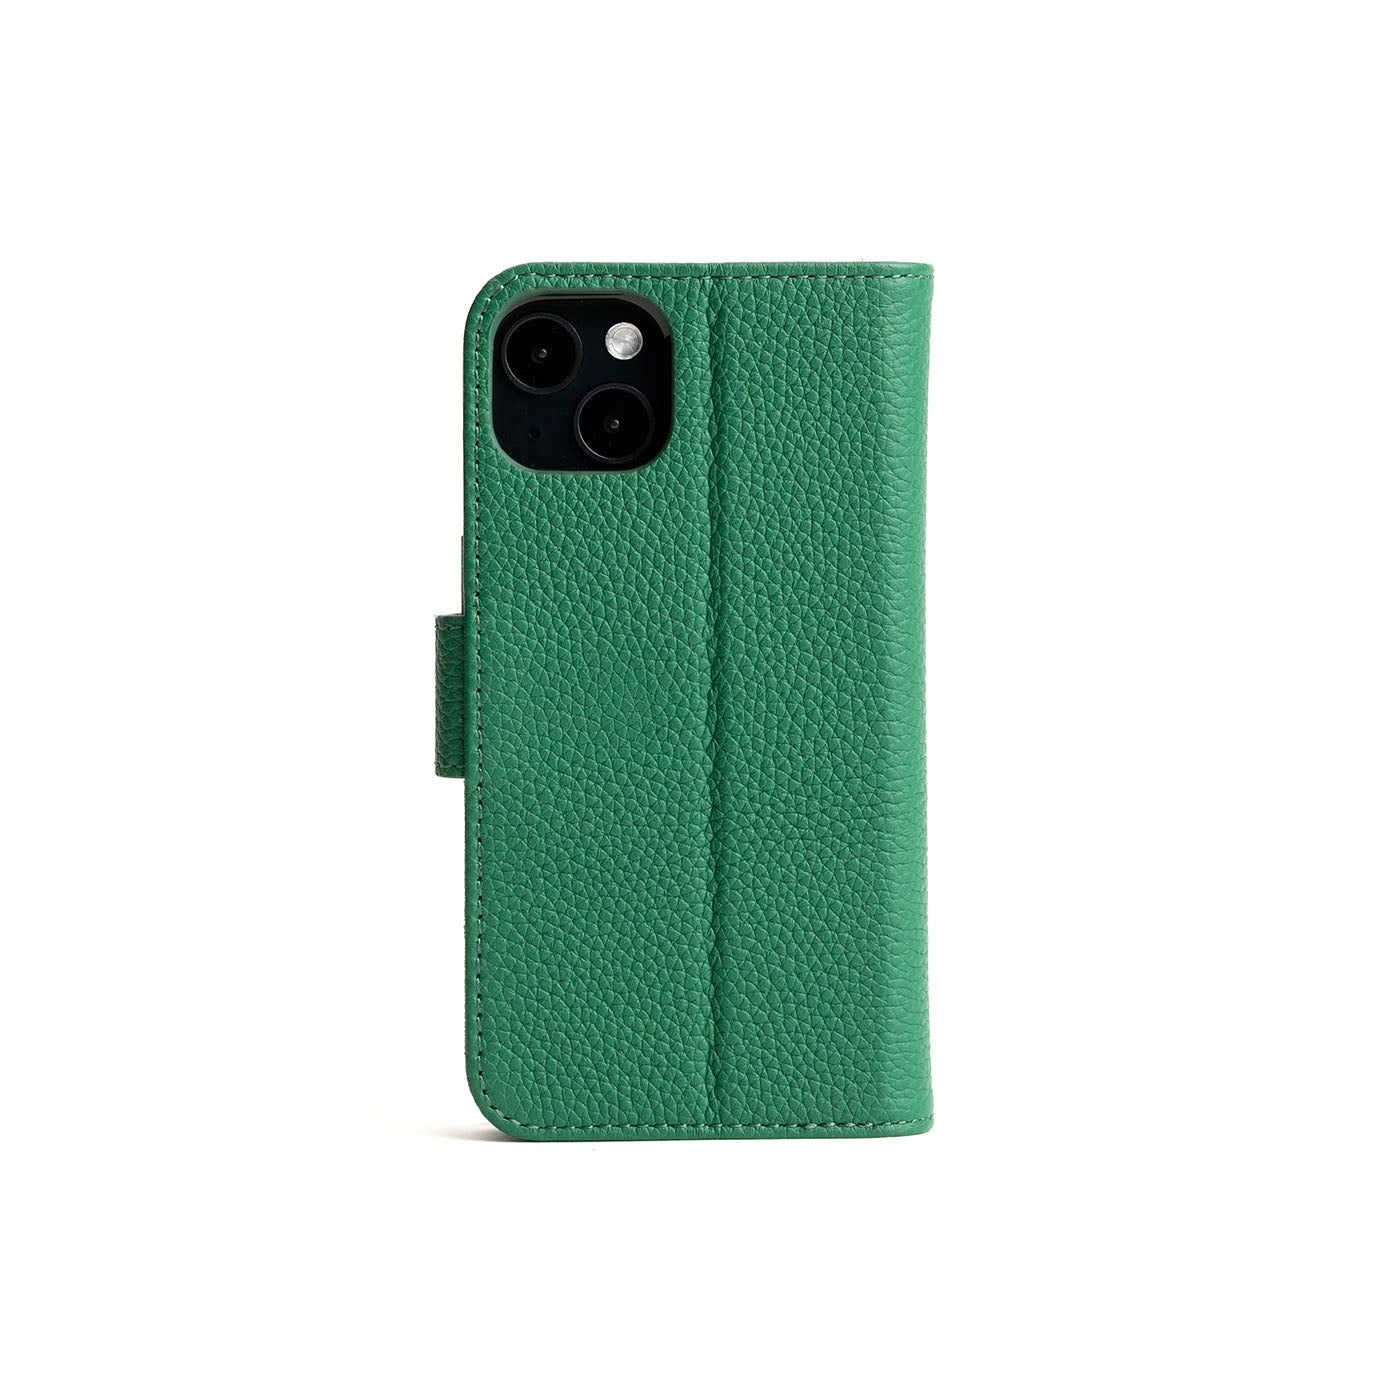 iPhone 11 Leather Case - with Detachable Wallet